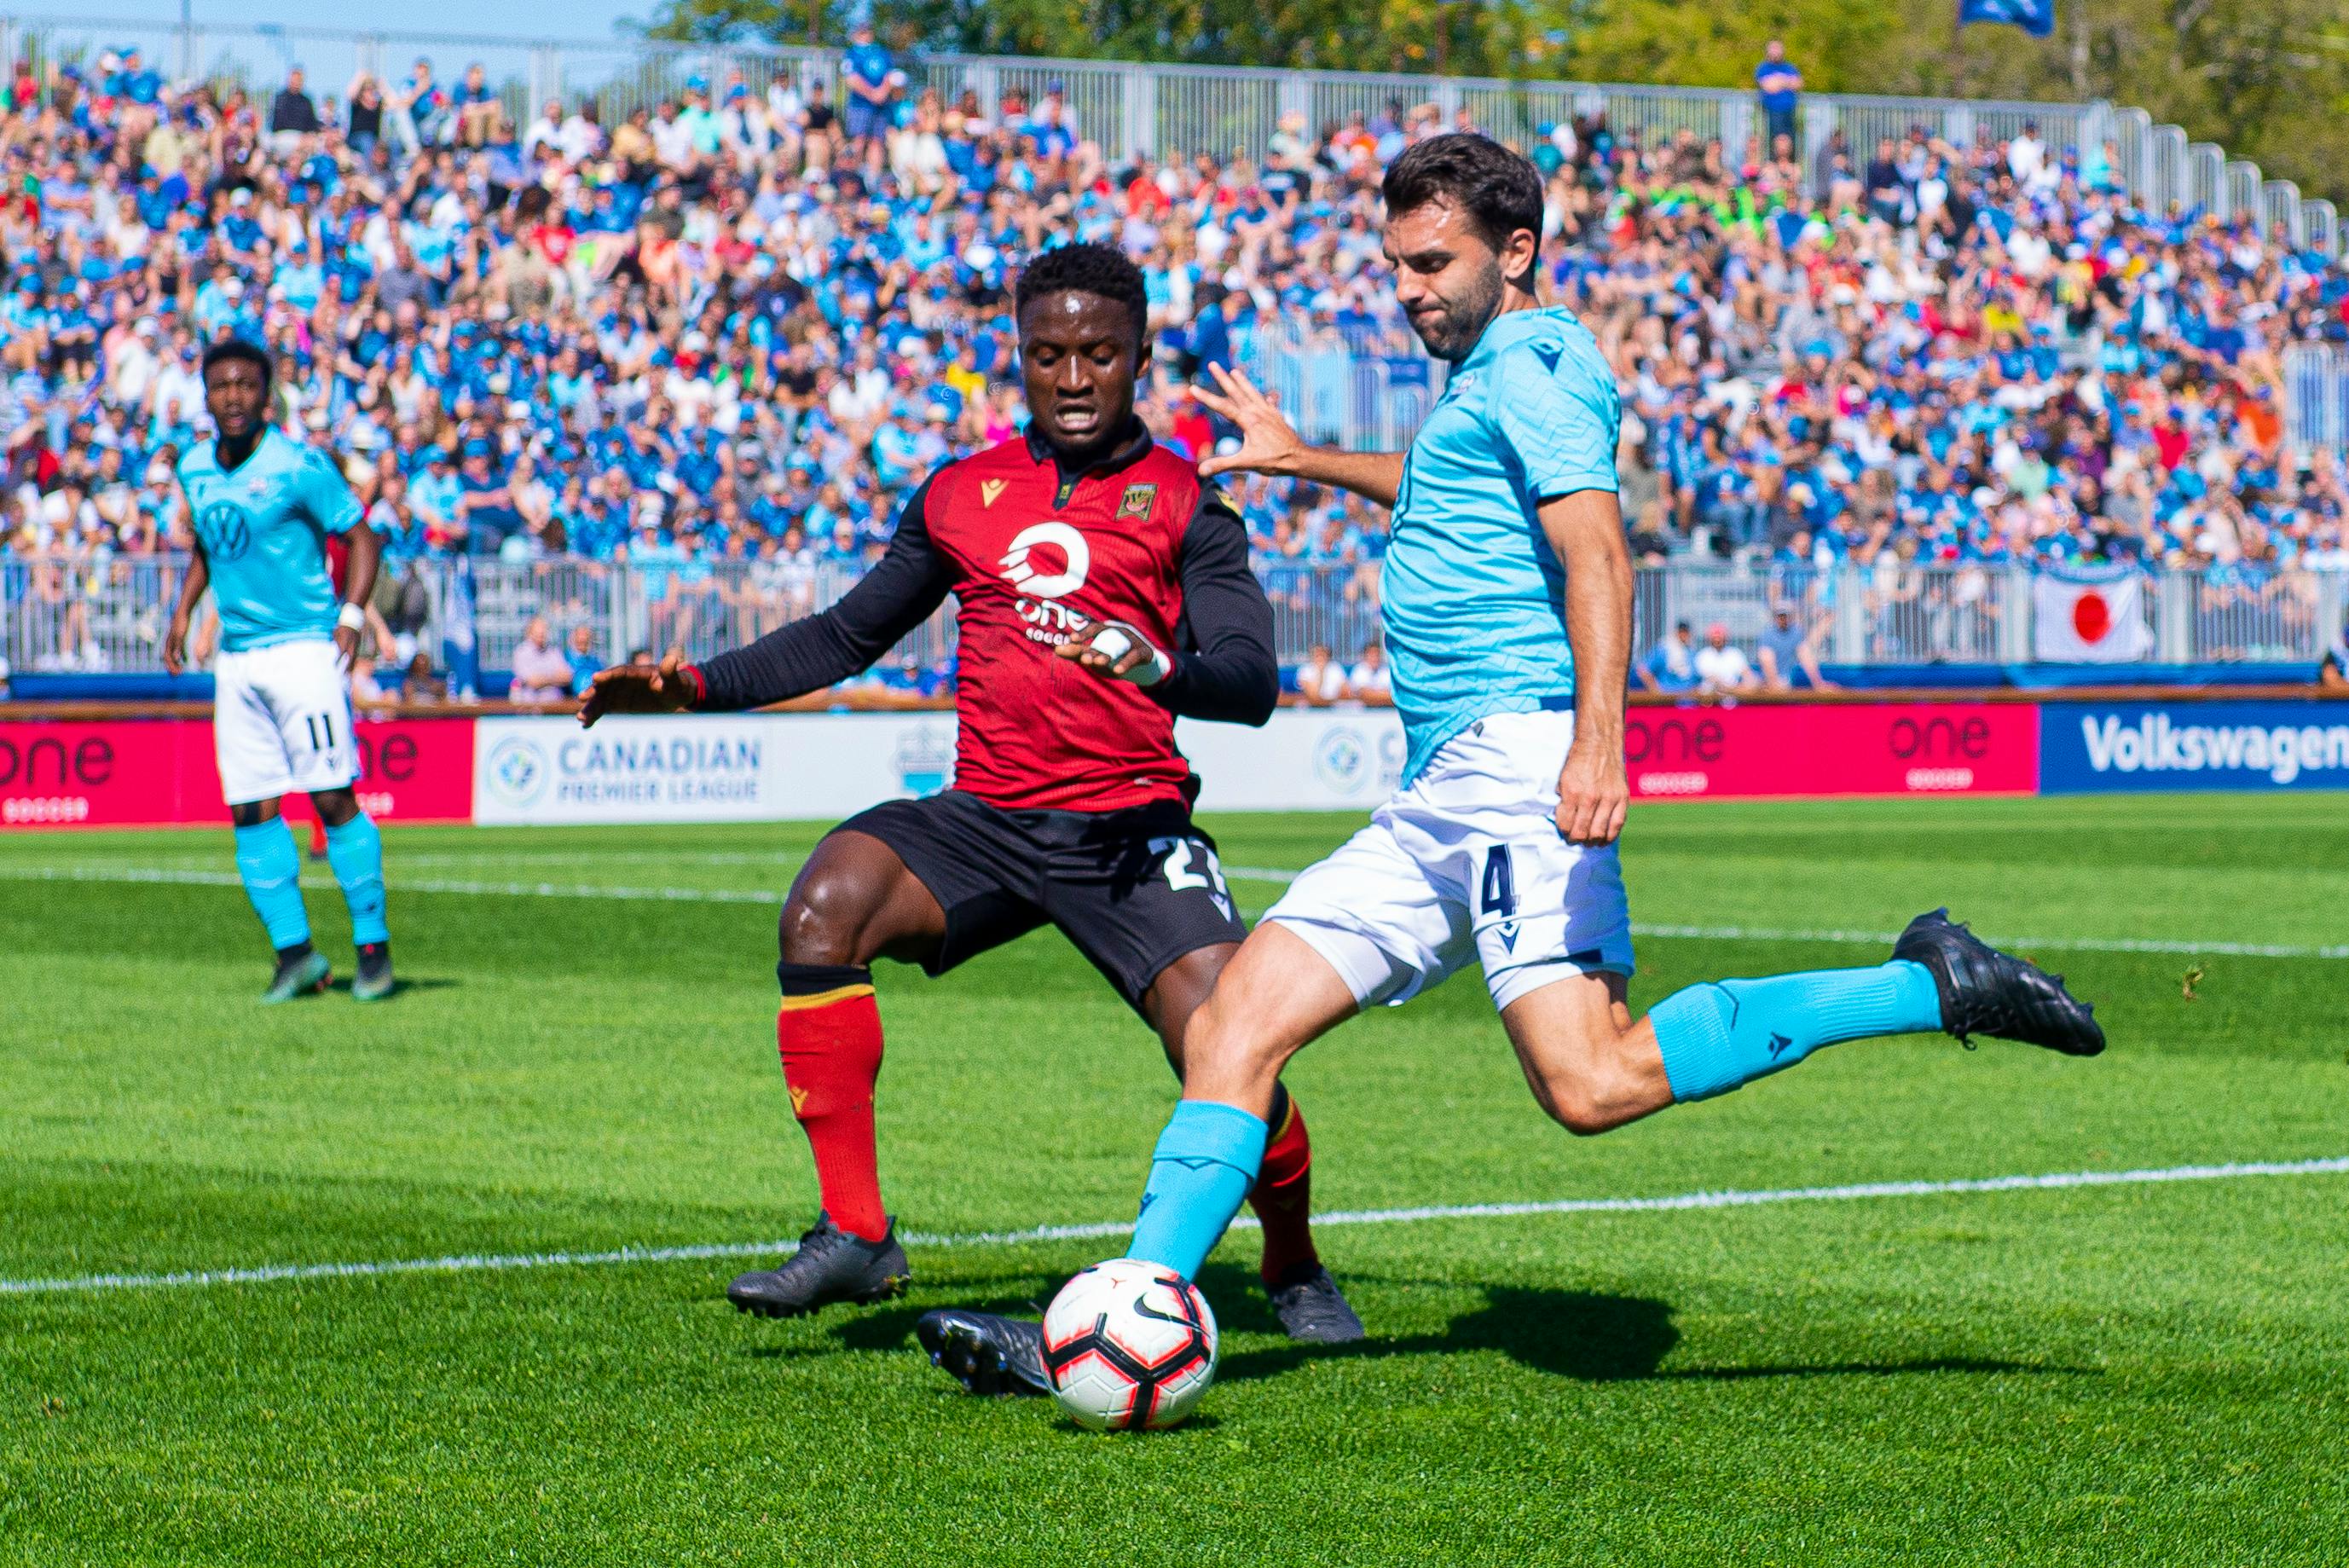 HFX Wanderers defender Alex De Carolis fends off a Valour FC attacker during a Canadian Premier League game in 2019 at the Wanderers Grounds. - HFX WANDERERS